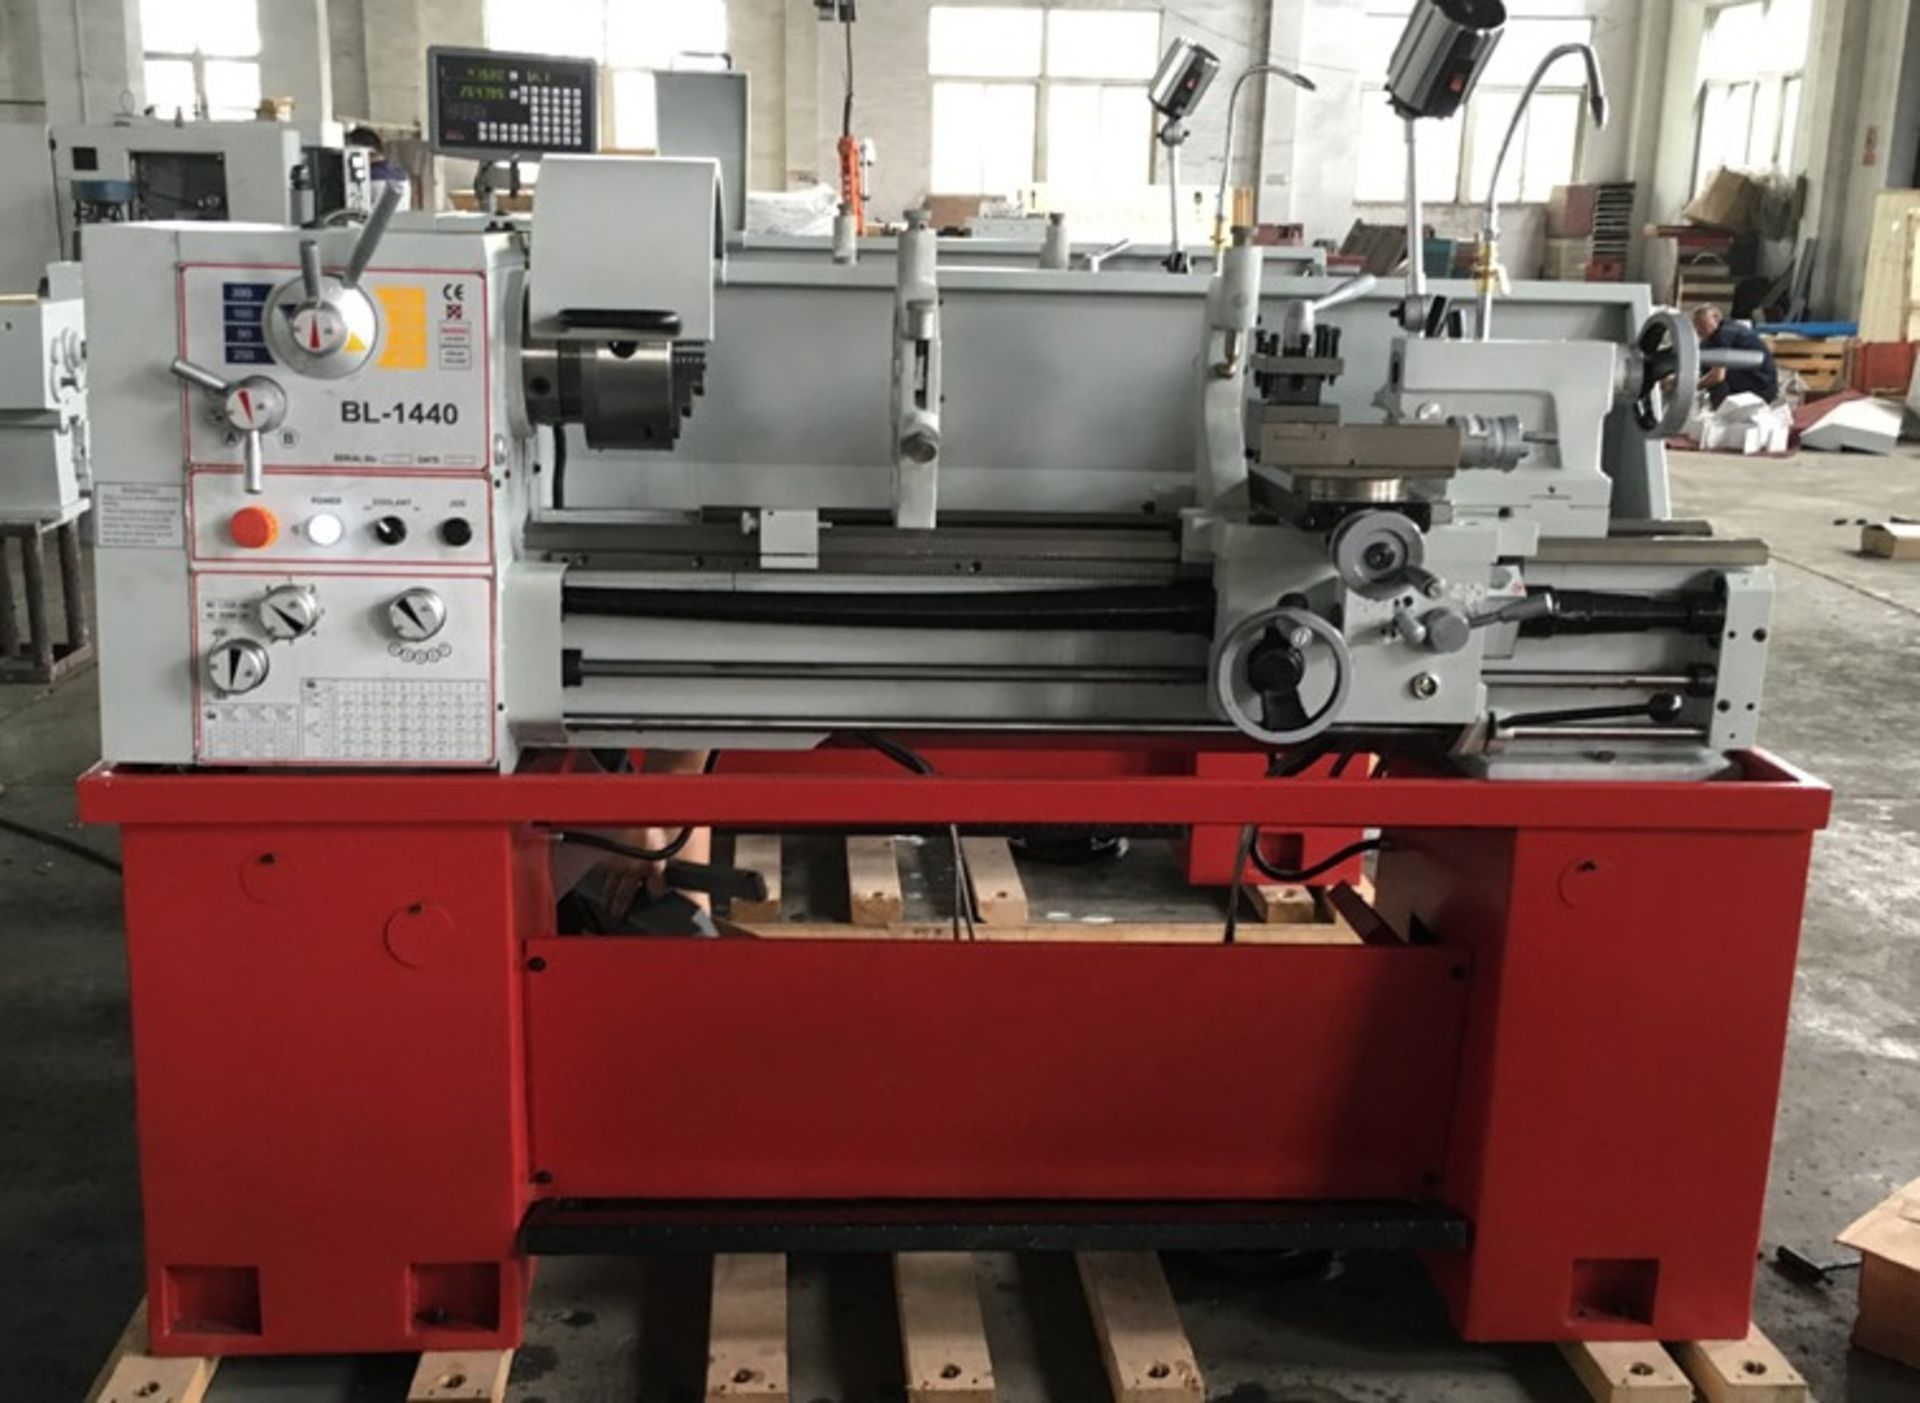 BL1440 Lathe with 14" Swing with 40" Between Centres with DRO (digital readout), tool post,